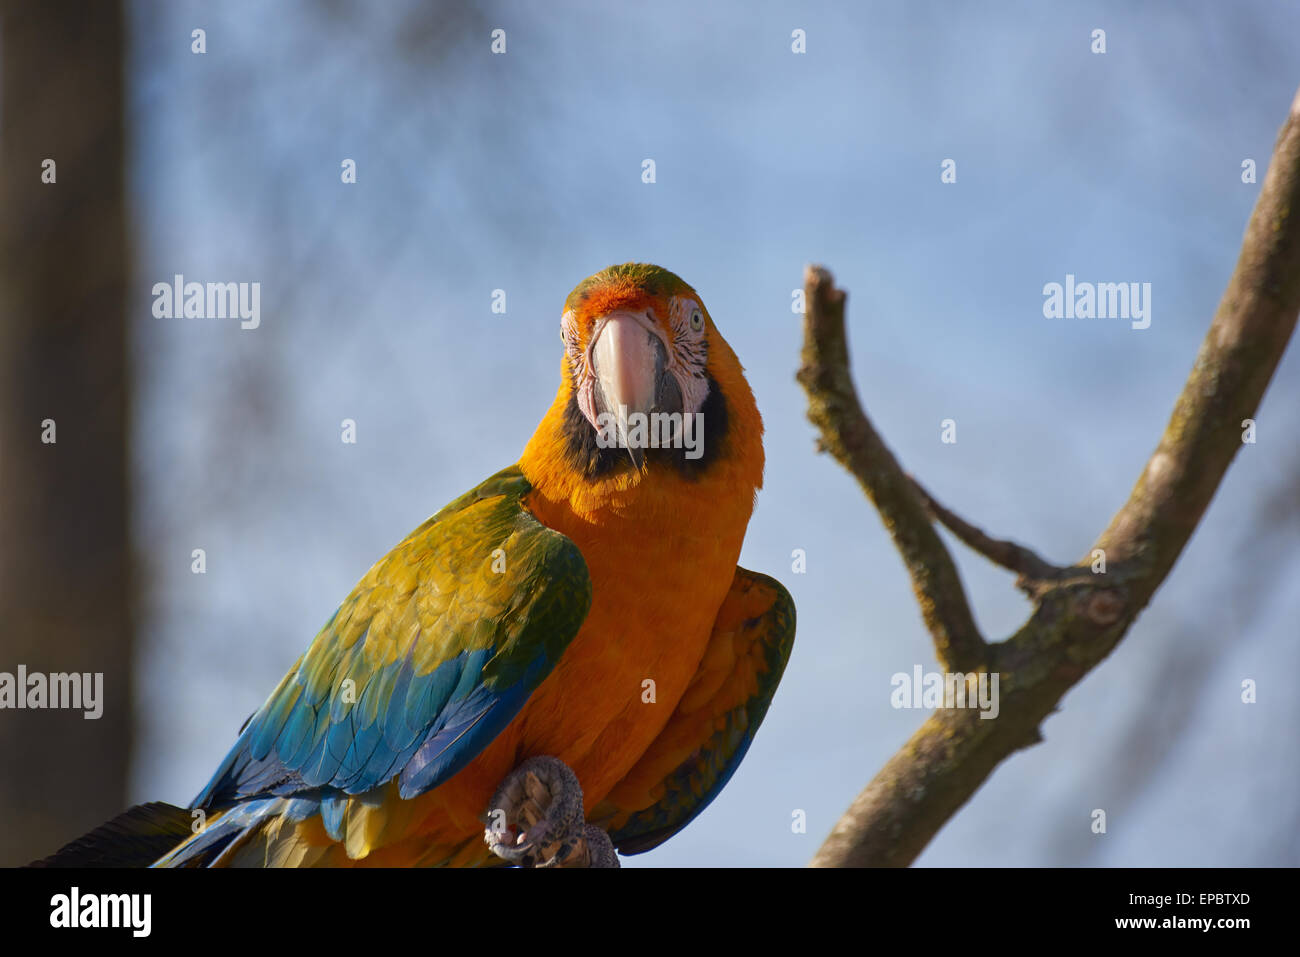 Gold and blue Macaw Parrot perching in a tree looking at camera Stock Photo